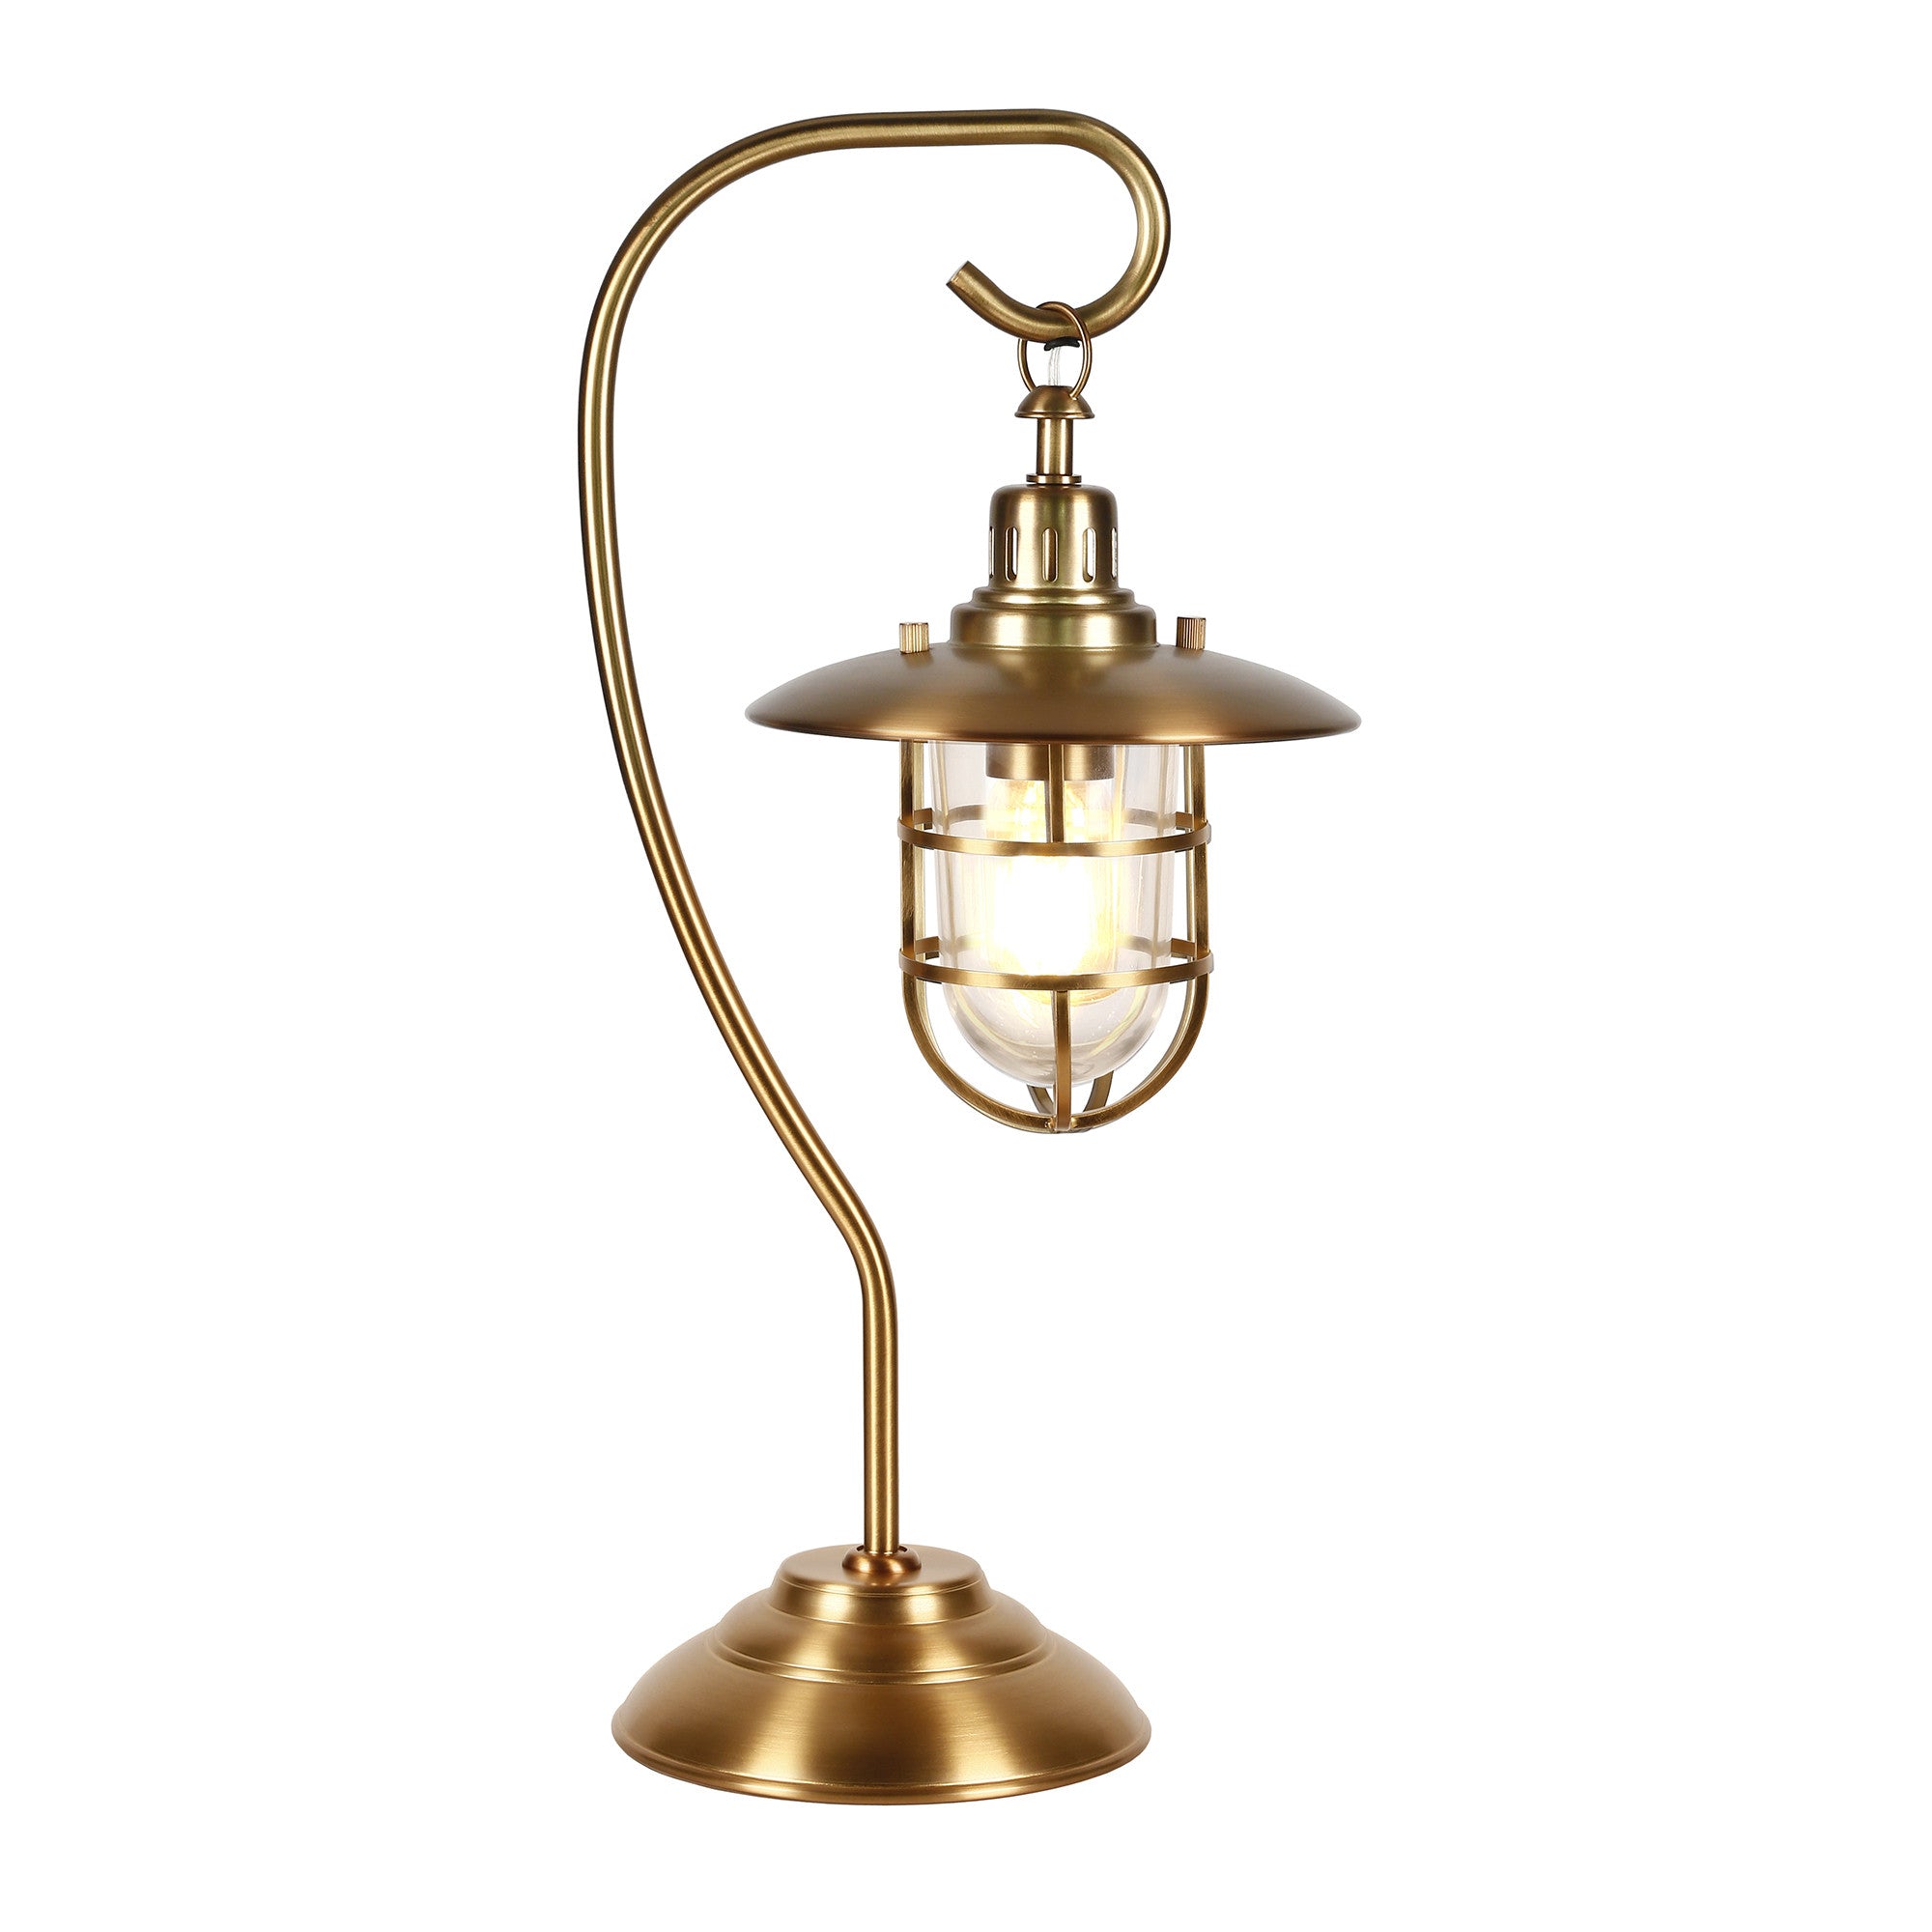 22" Antiqued Brass Metal Arched Table Lamp With Brass Cage Shade